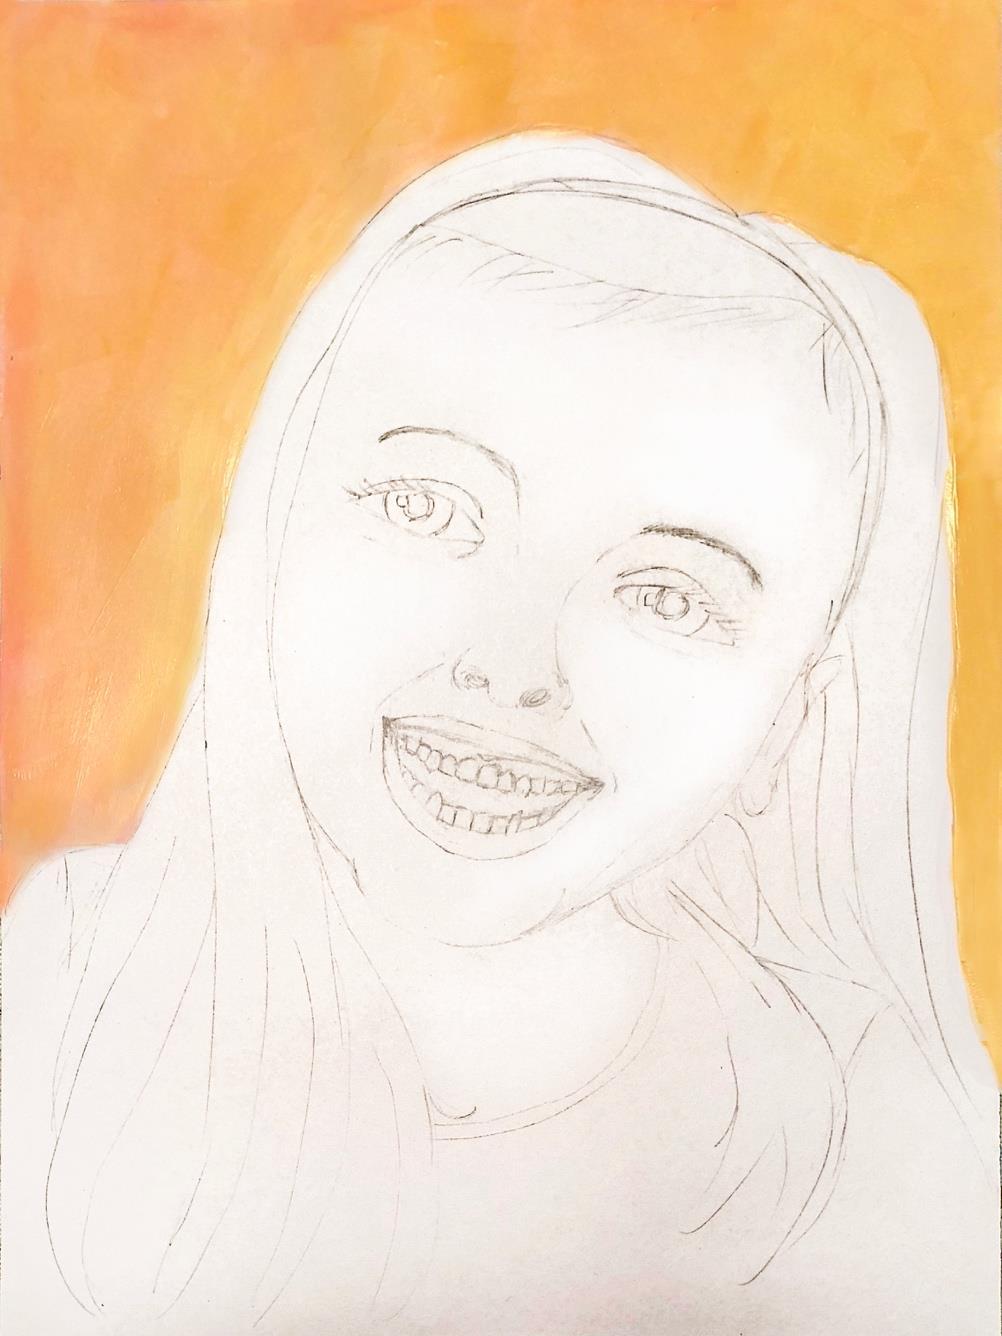 Step 3 Now paint the background color or colors you chose outside of the pencil line you drew. The colors chosen here are yellow and orange to complement the happy expression on the girl s face.